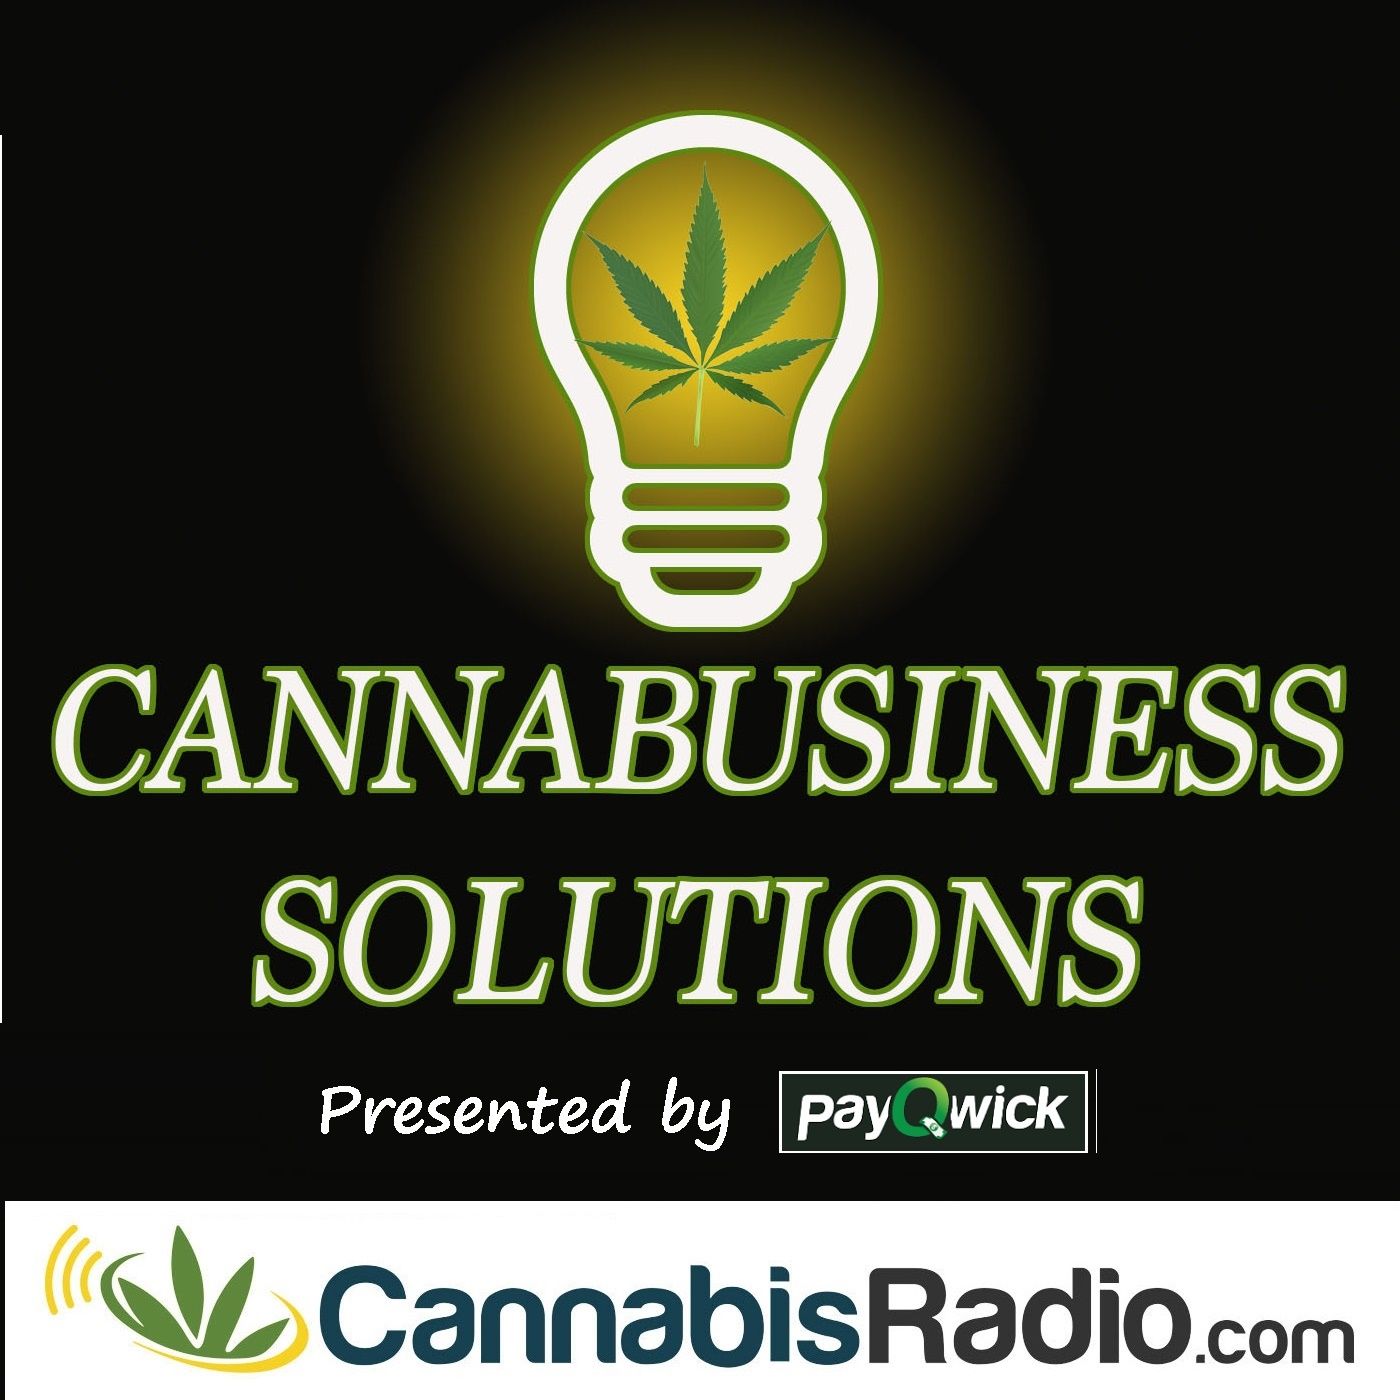 Cannabusiness Solutions From a Certified Public Accountant